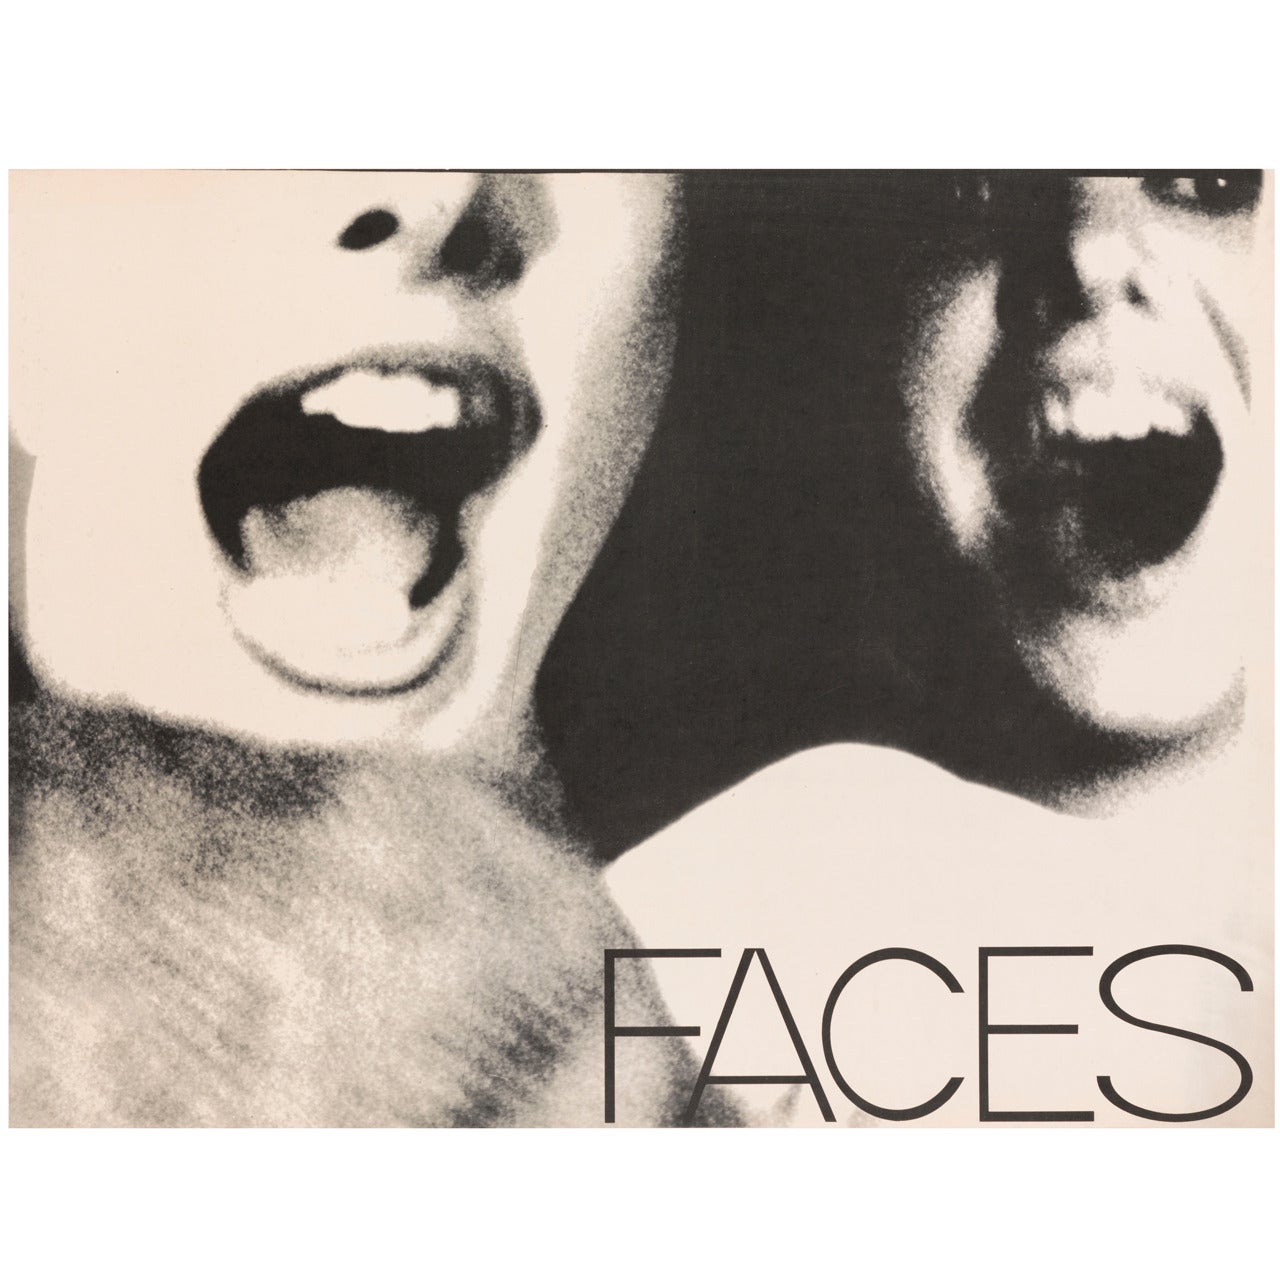 Film Poster for "Faces"